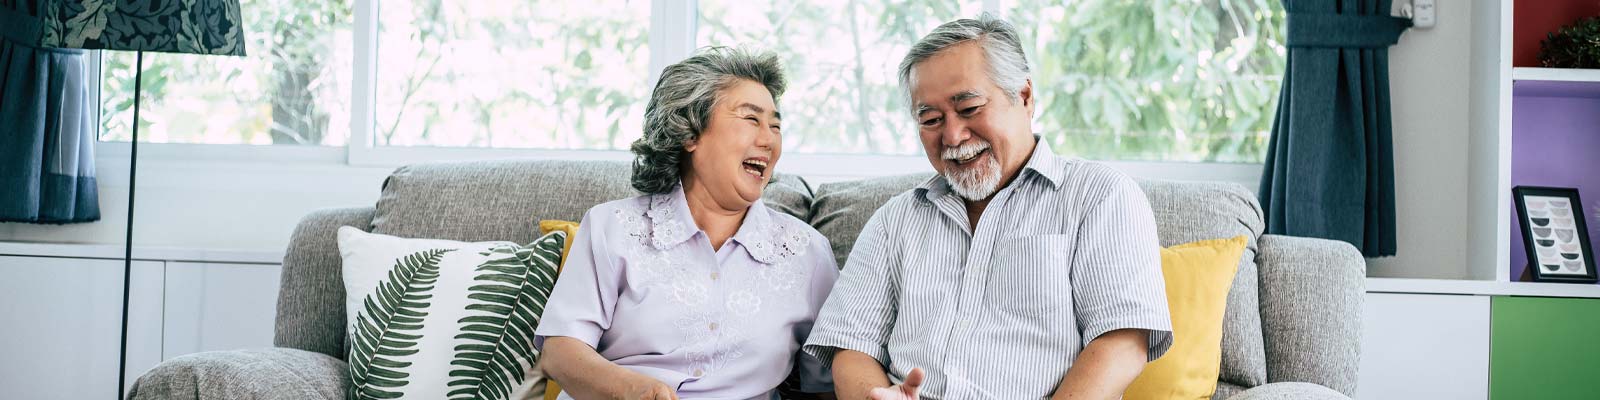 Senior couple laughing and smiling